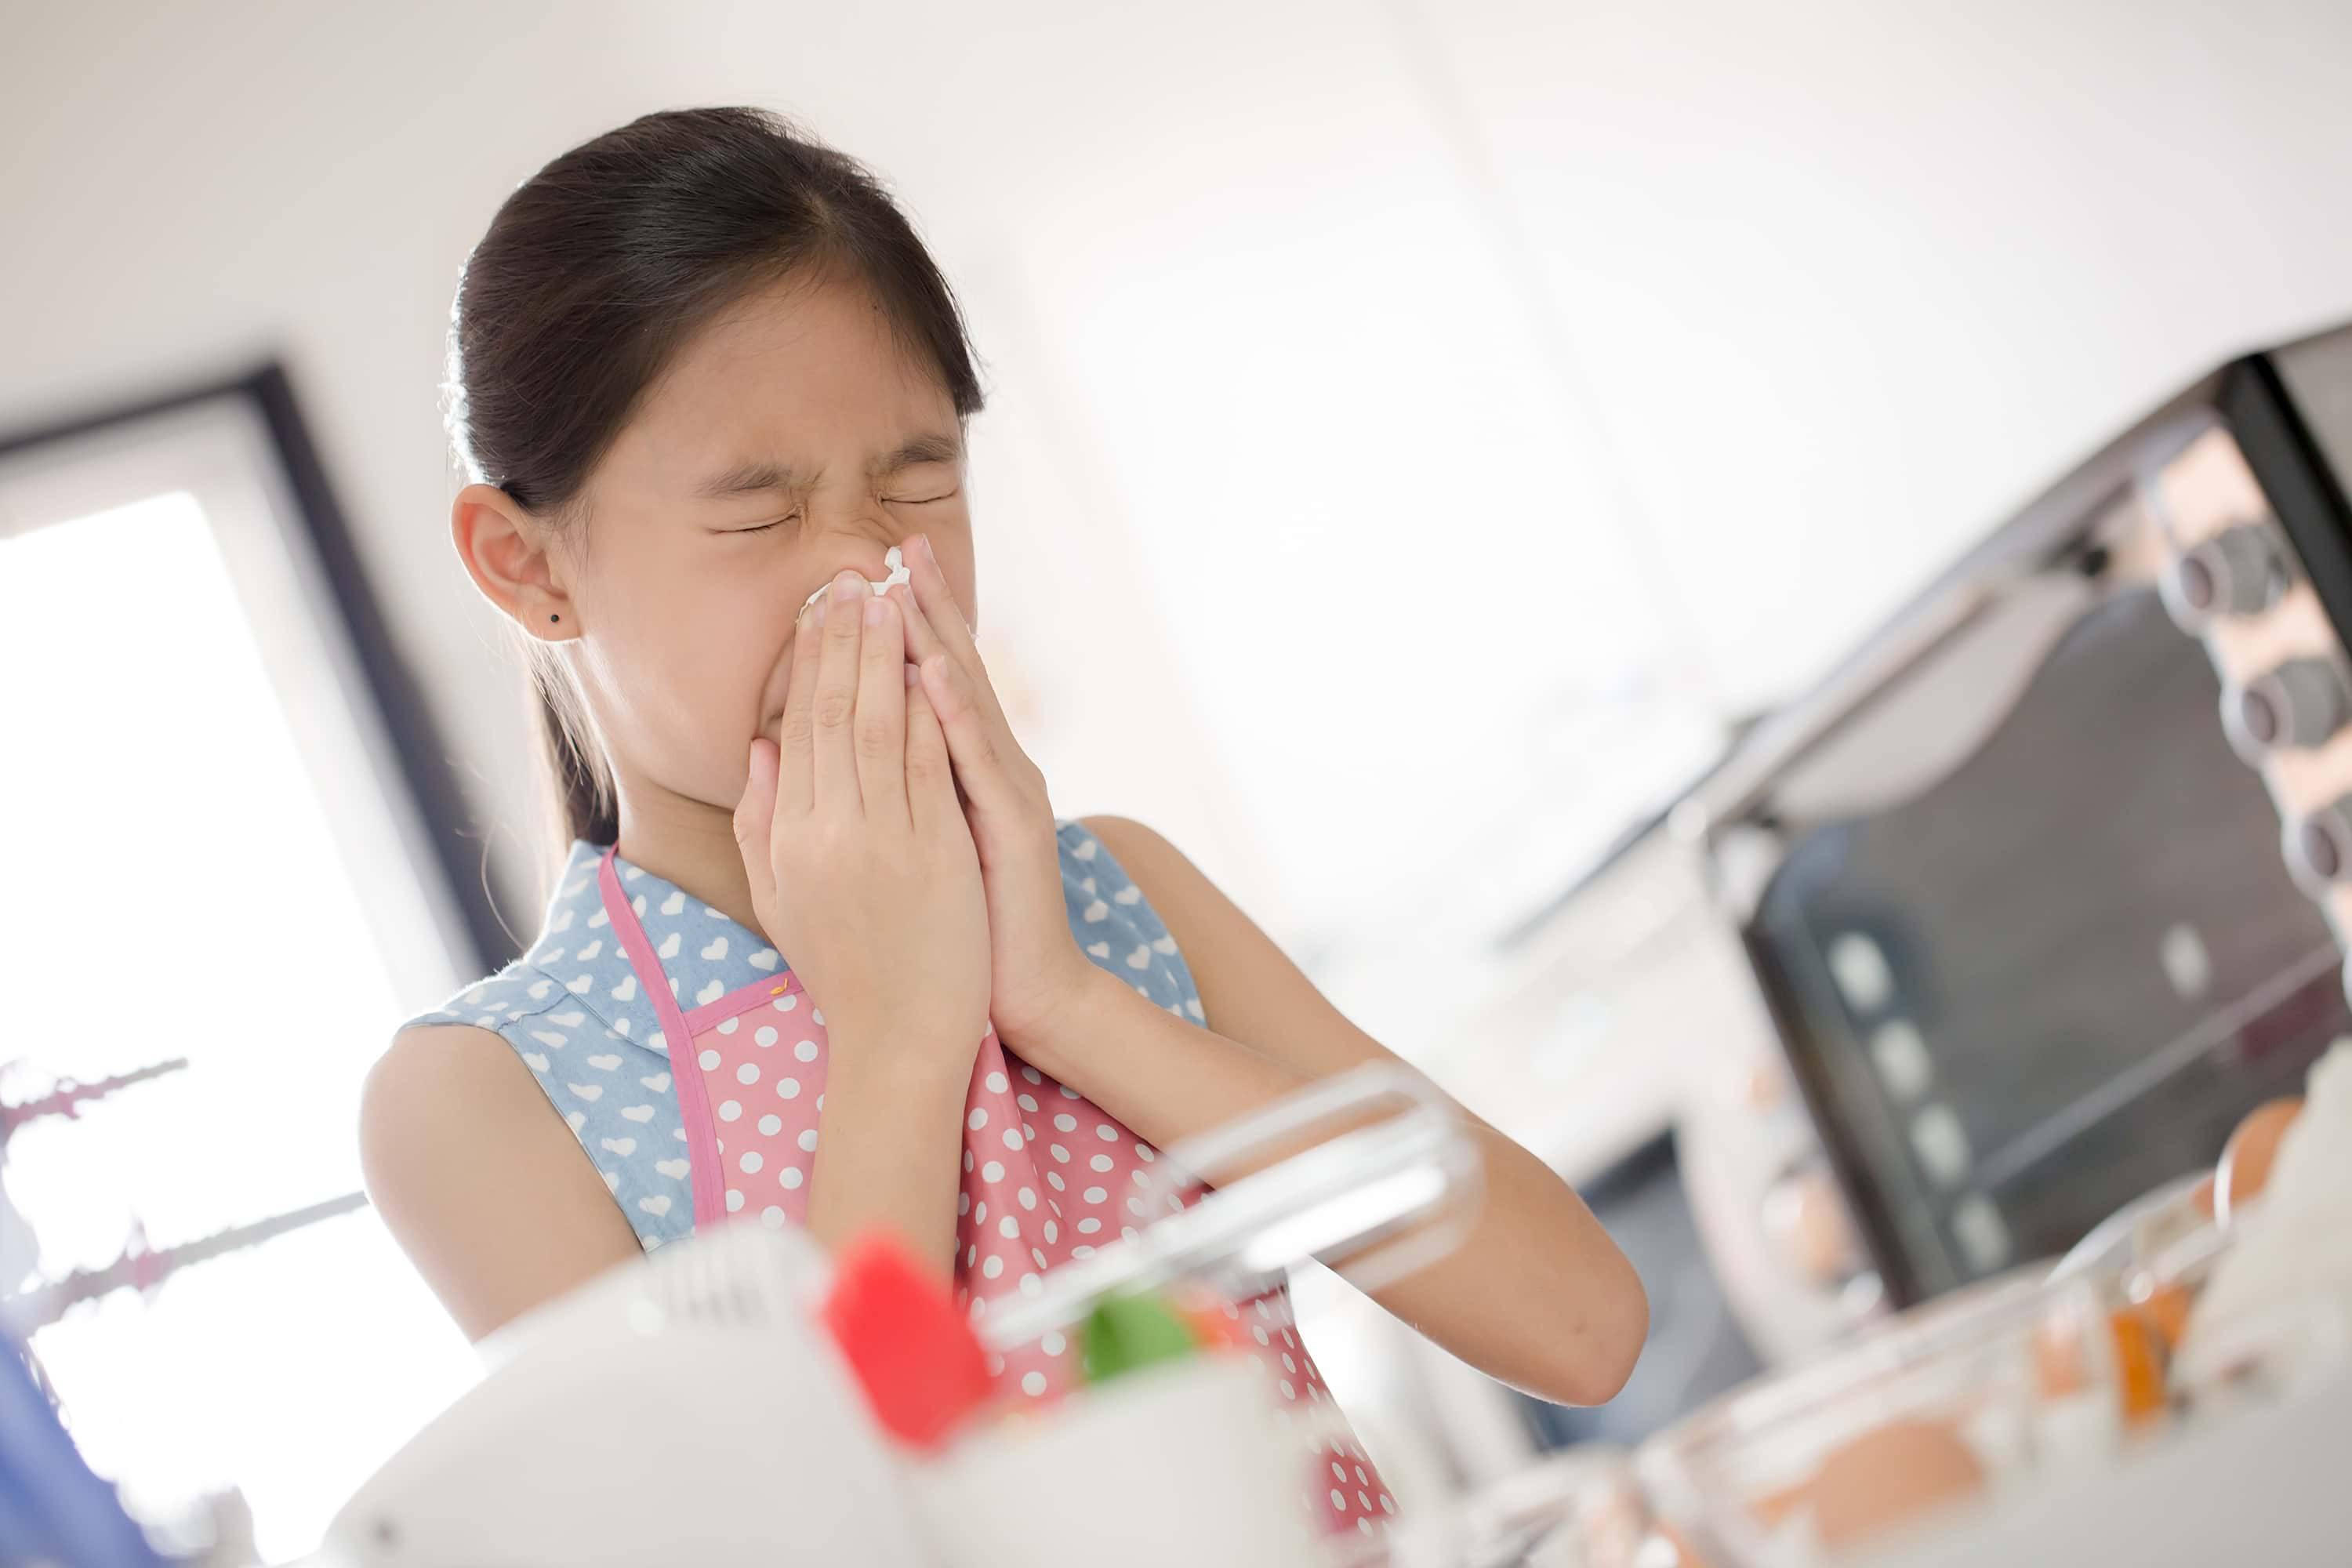 Child sneezing in kitchen research project microbiology